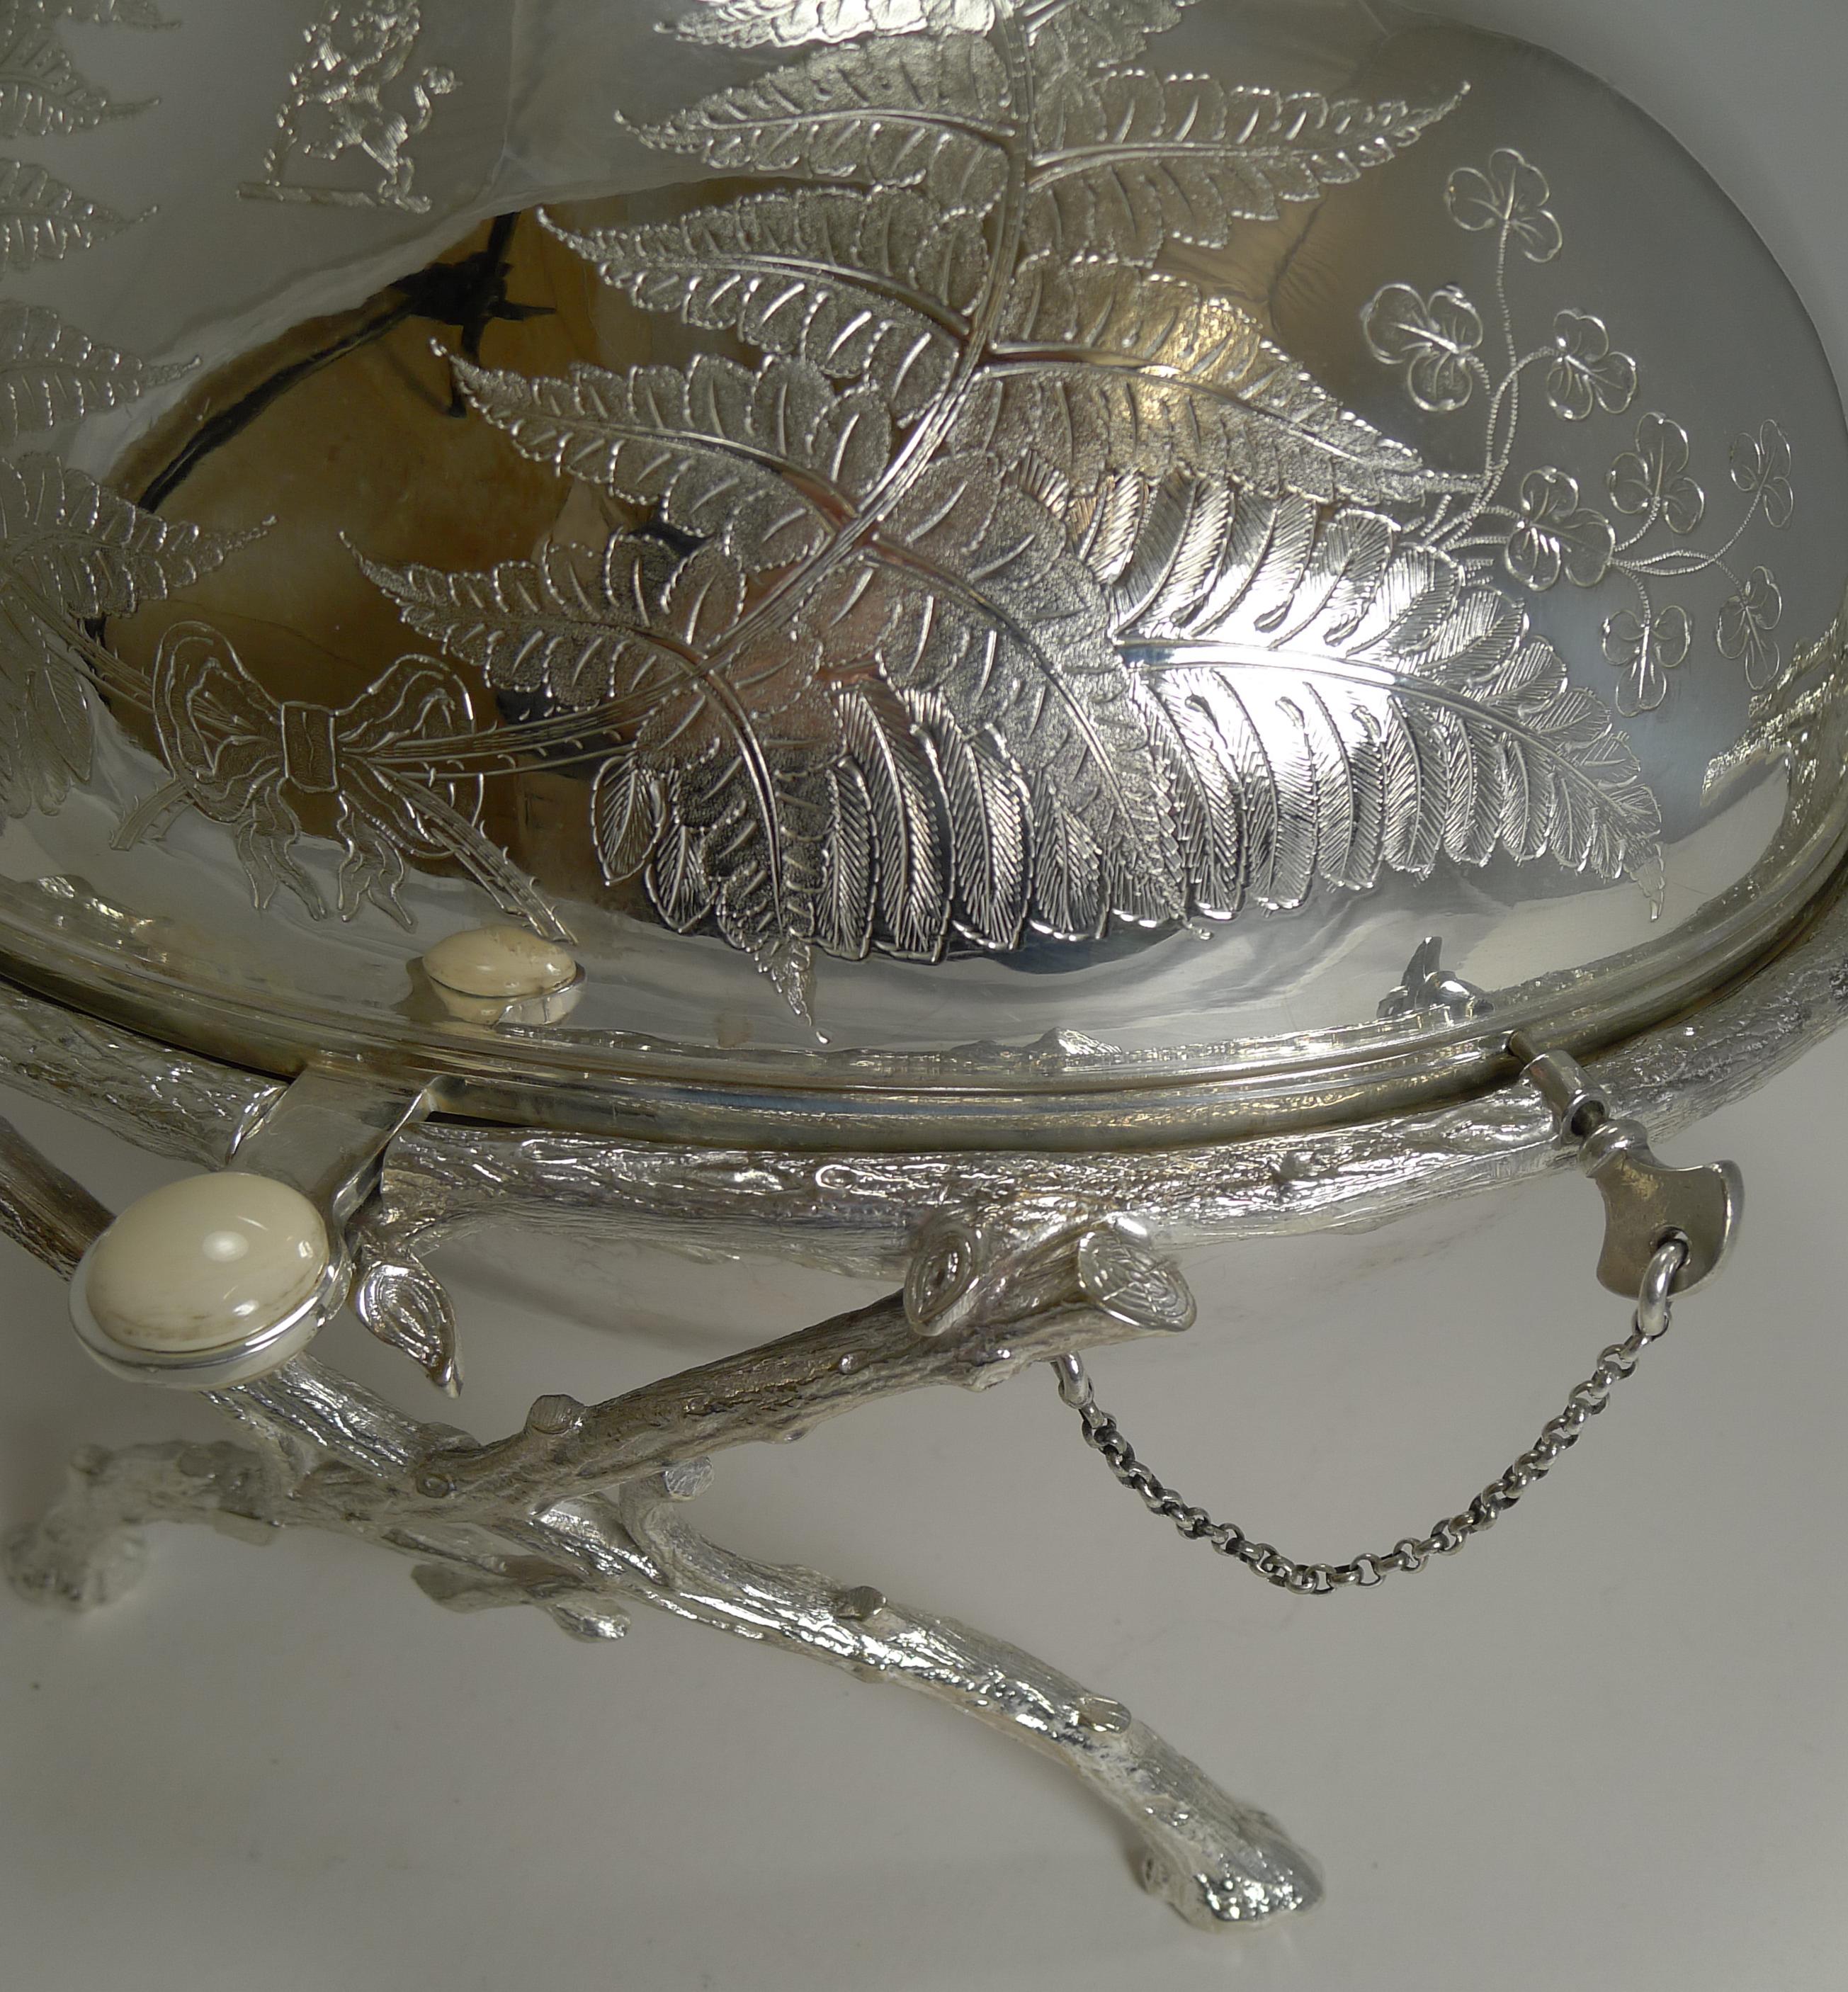 Late 19th Century Magnificent Antique English Revolving Breakfast Dish by Atkin Brothers